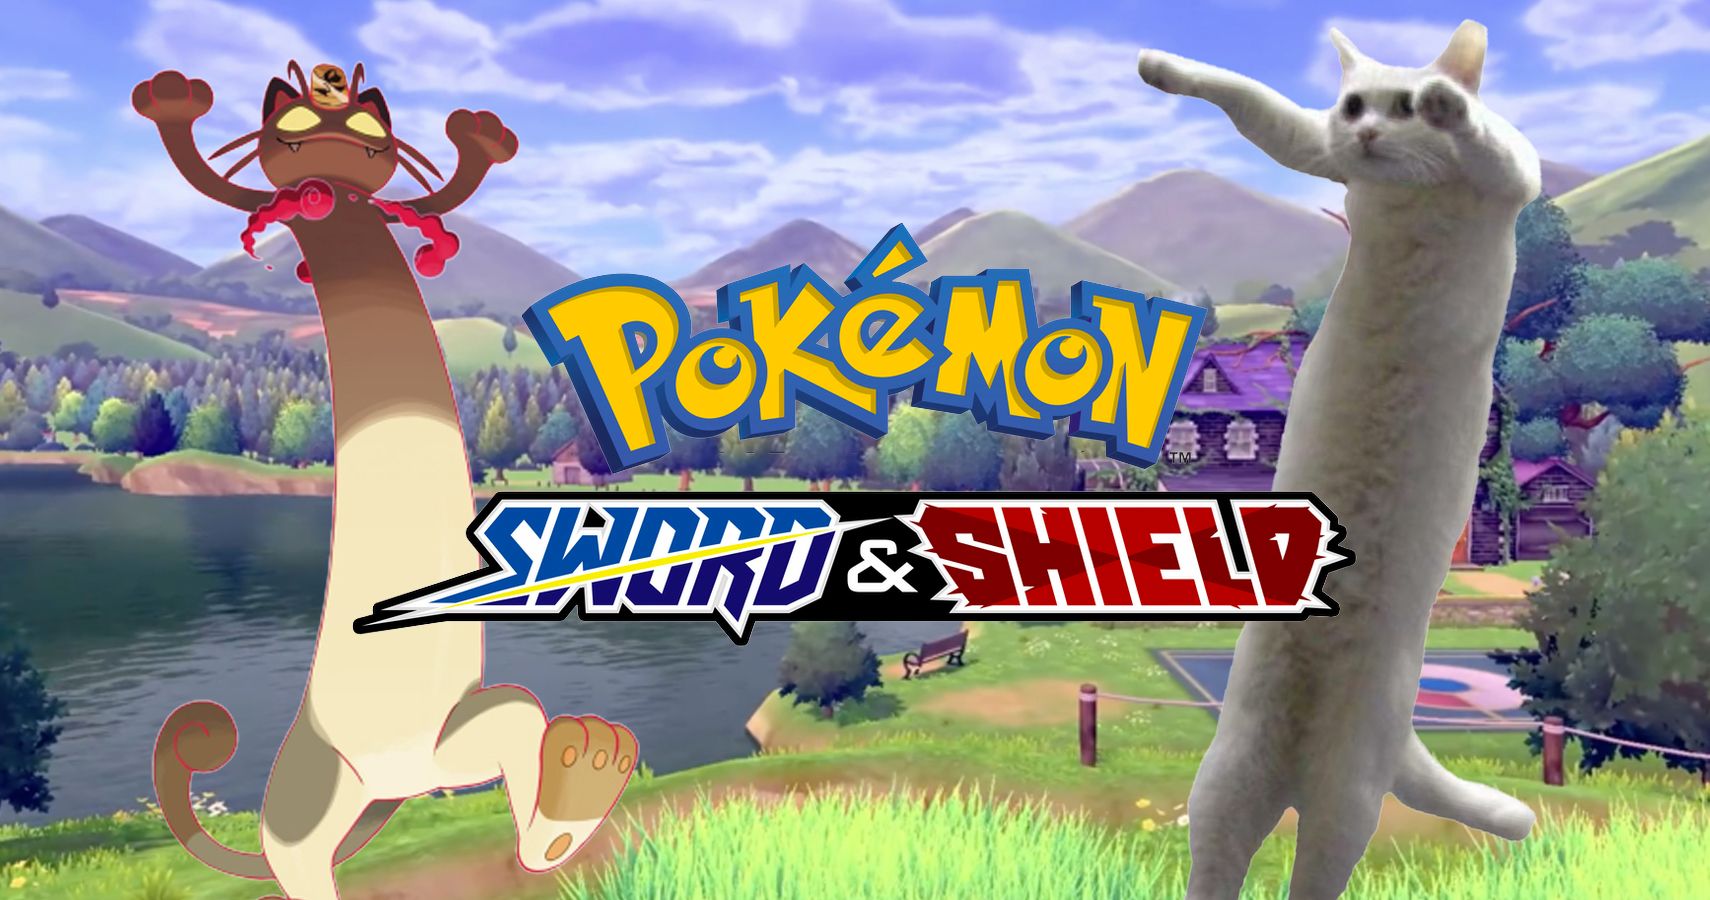 Pokémon Fans Are Comparing Sword & Shield’s Gigantamax Meowth To A Meme And We Can’t Unsee It